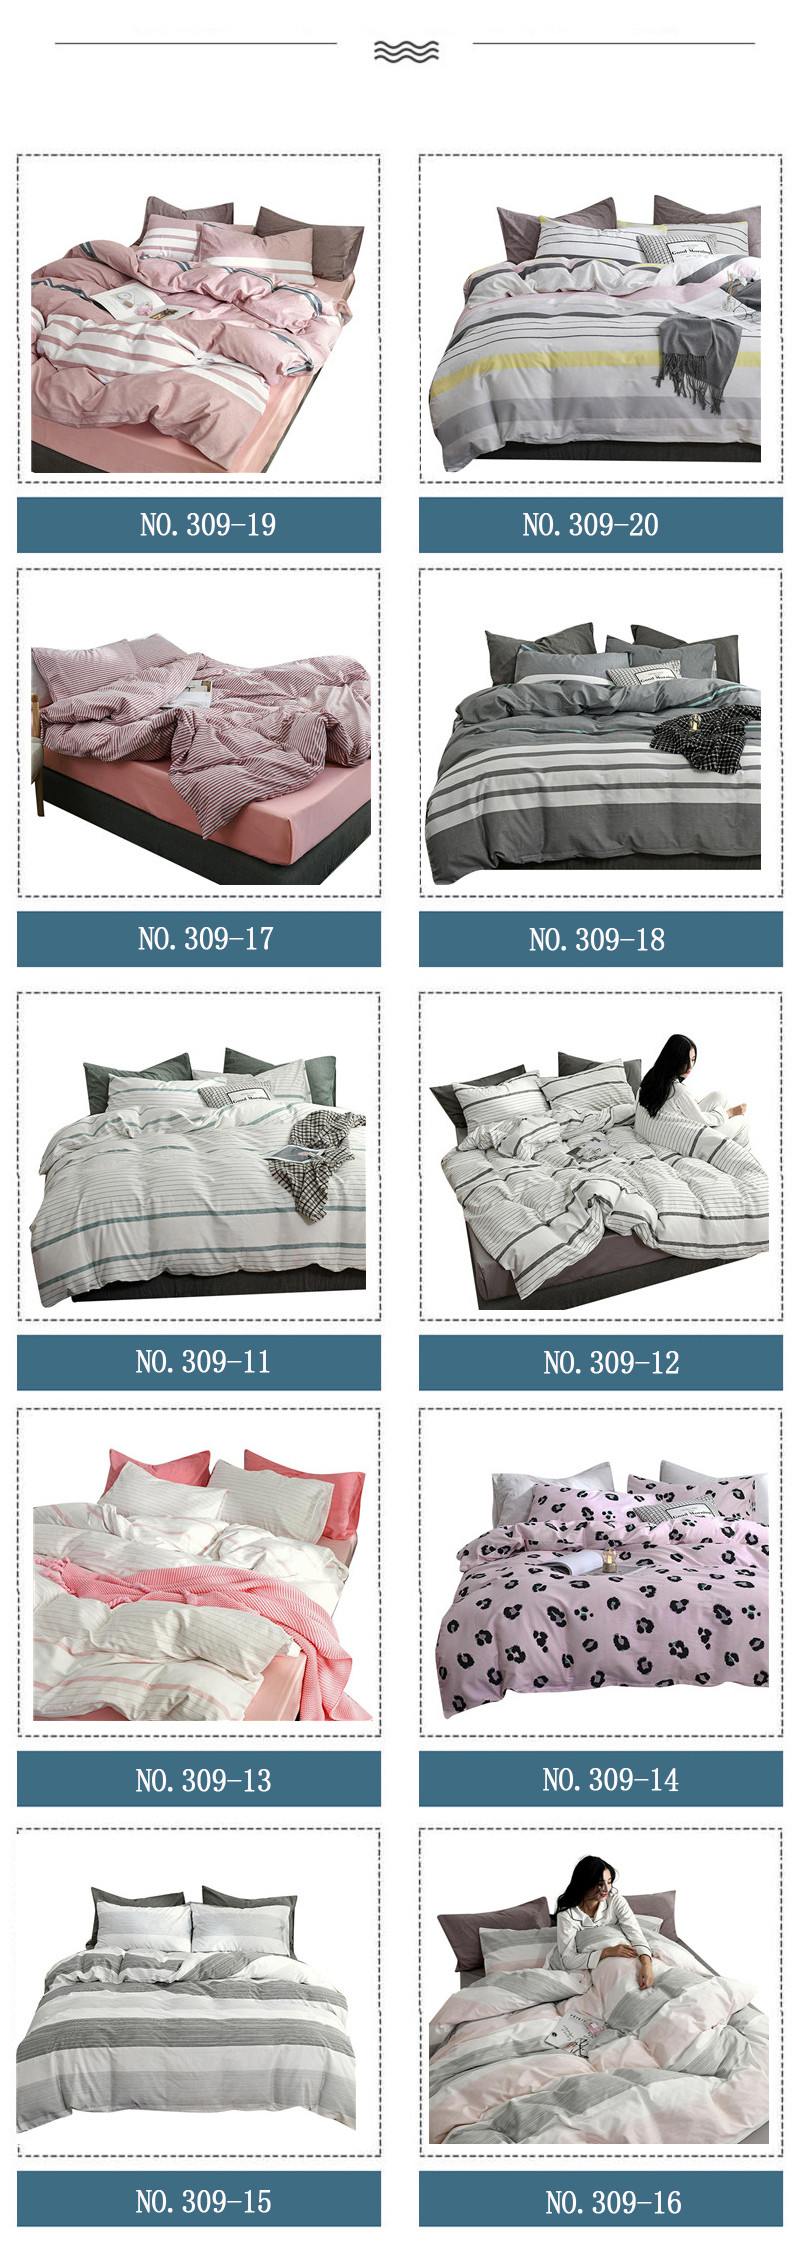 King Bed High Quality Bedding Set